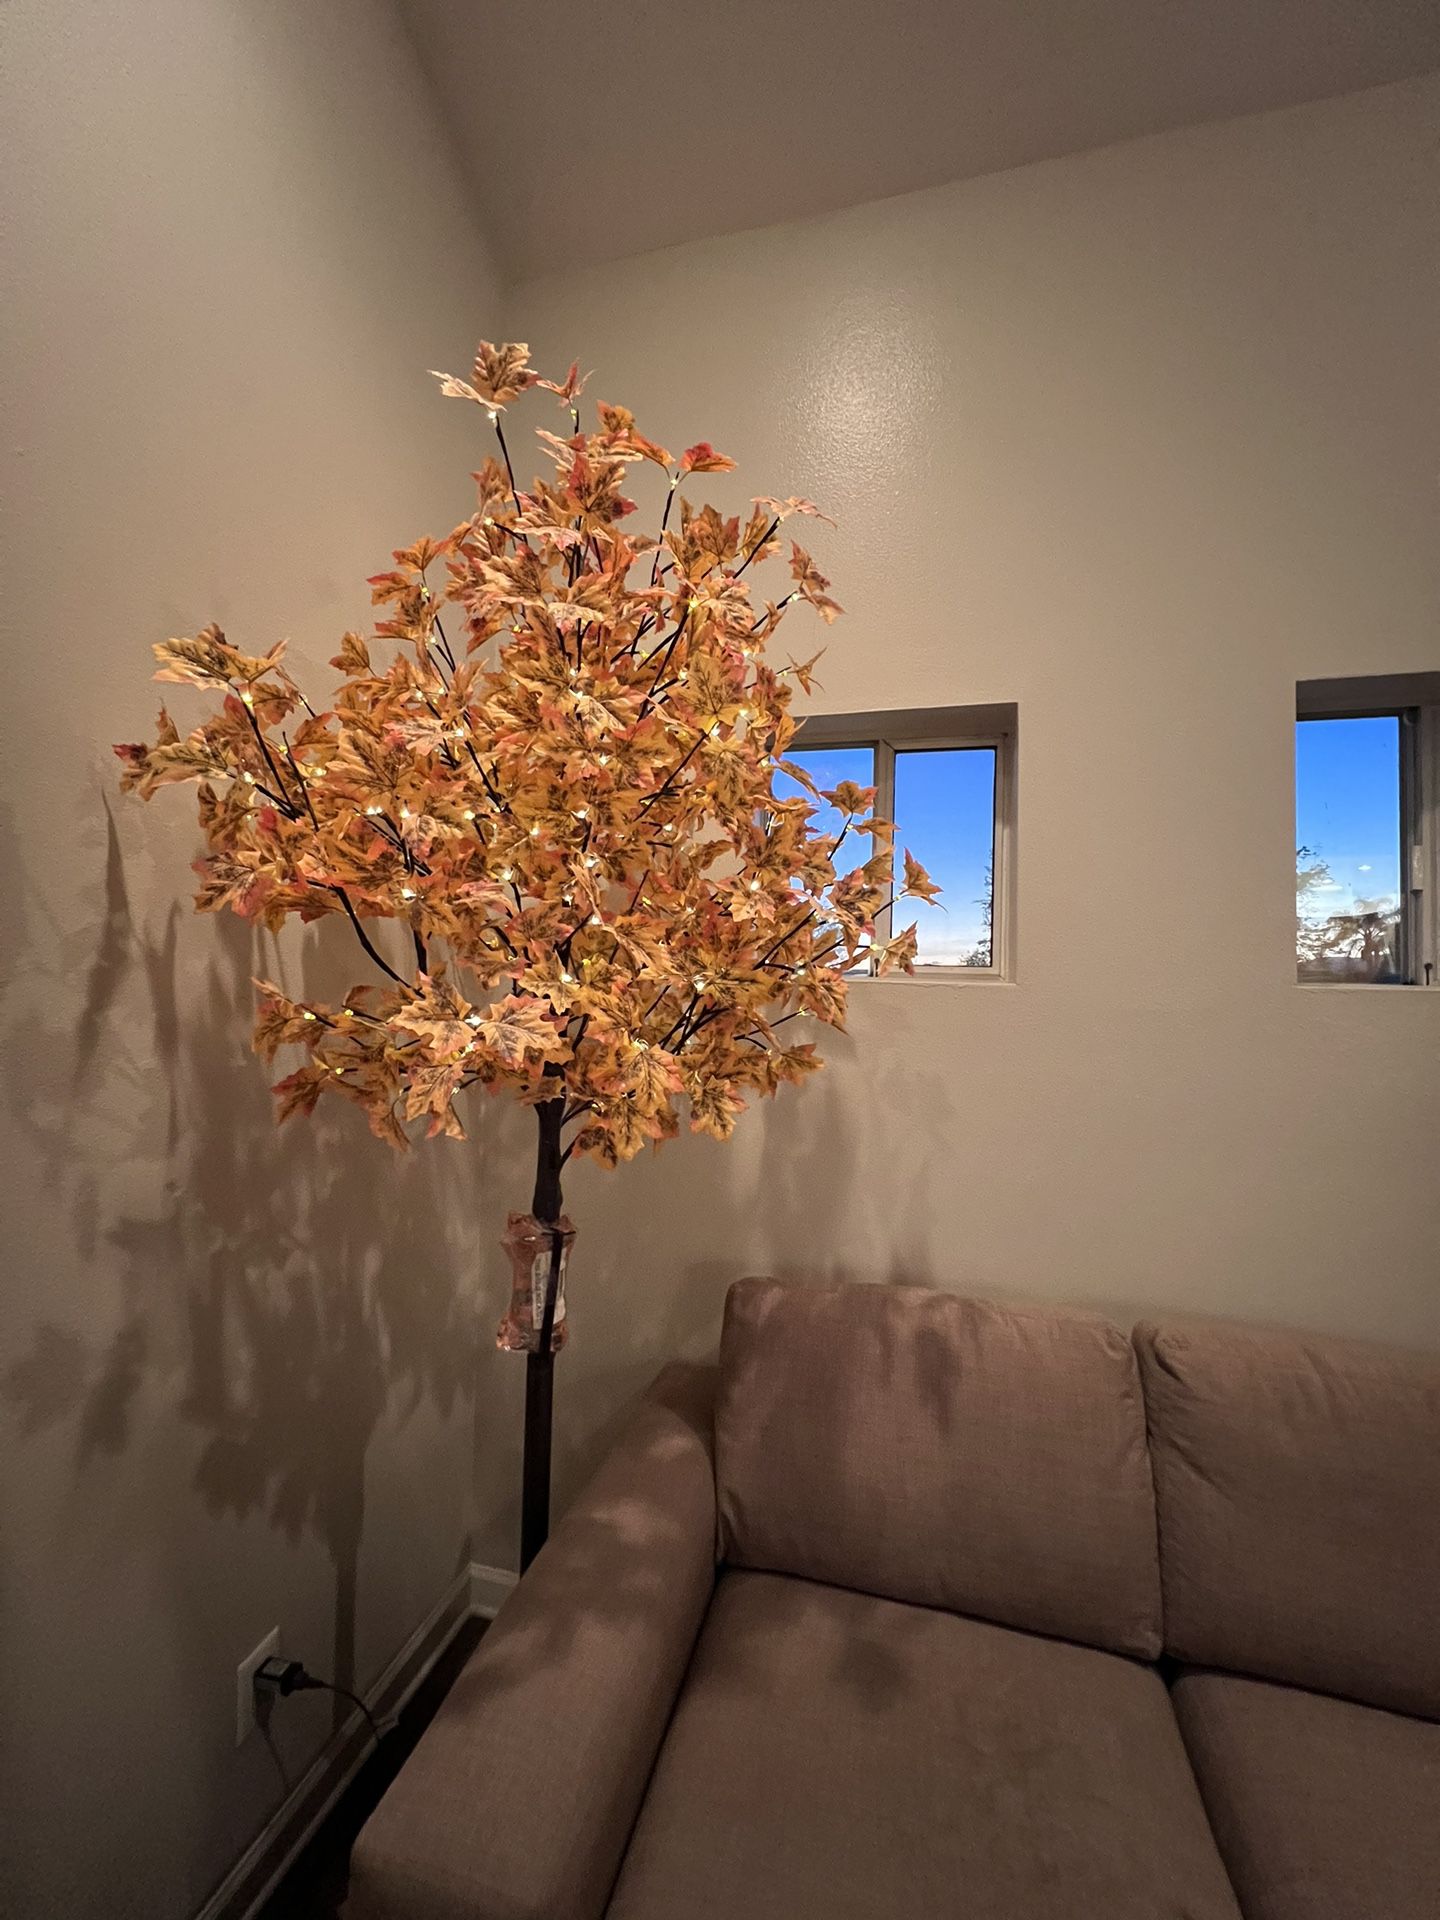 Faux / Fake Plants And Light-up Tree Home Decor